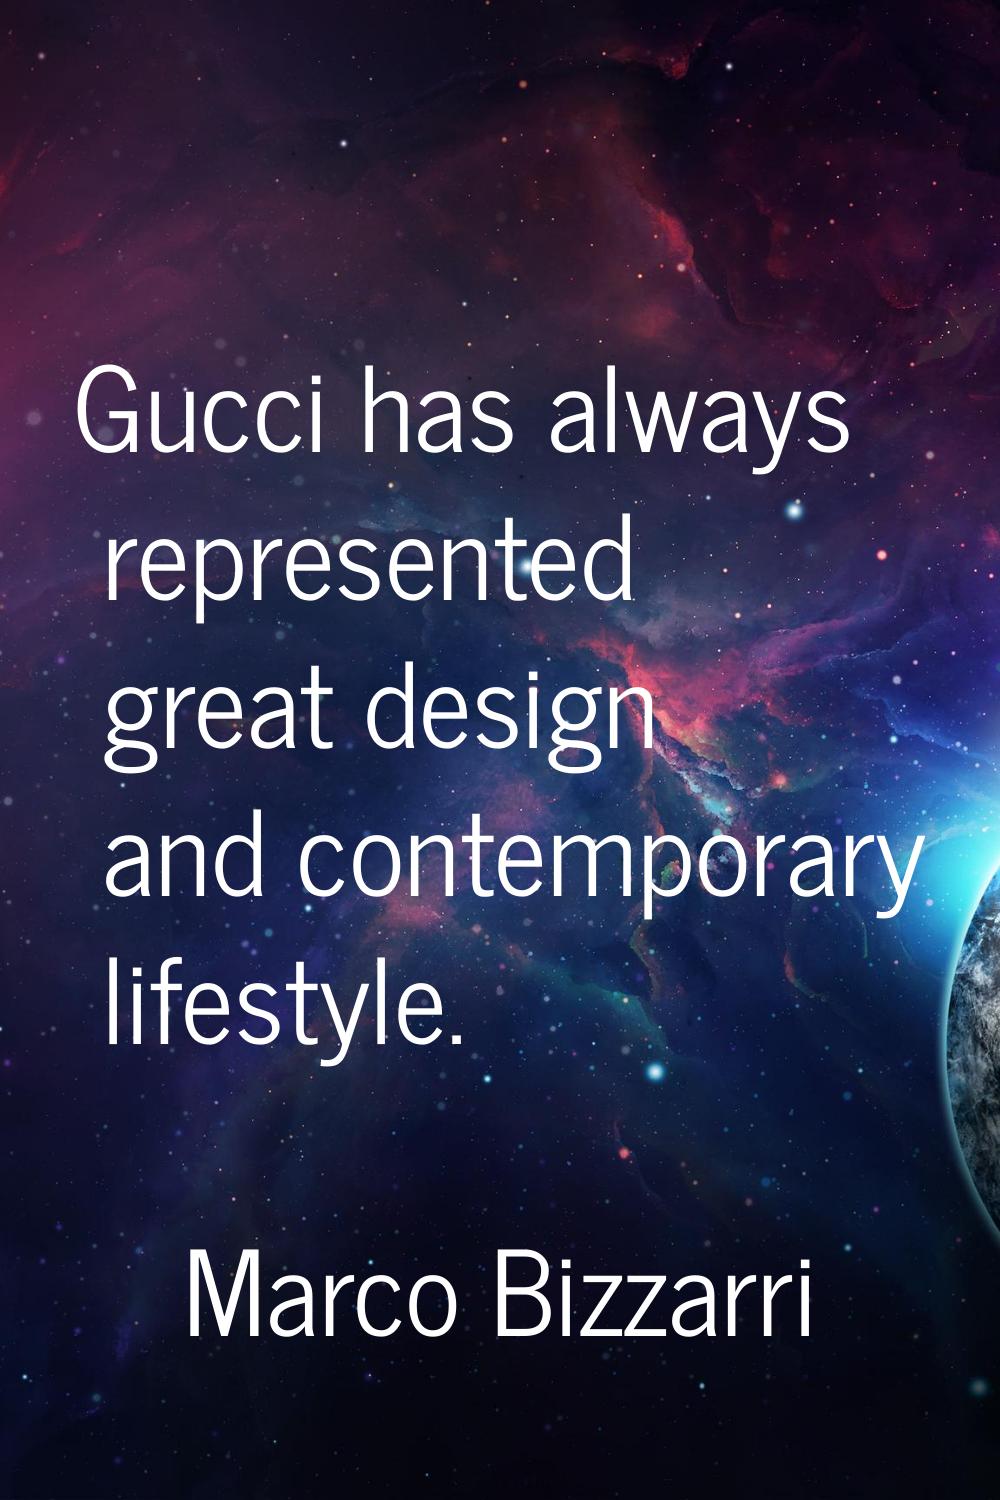 Gucci has always represented great design and contemporary lifestyle.